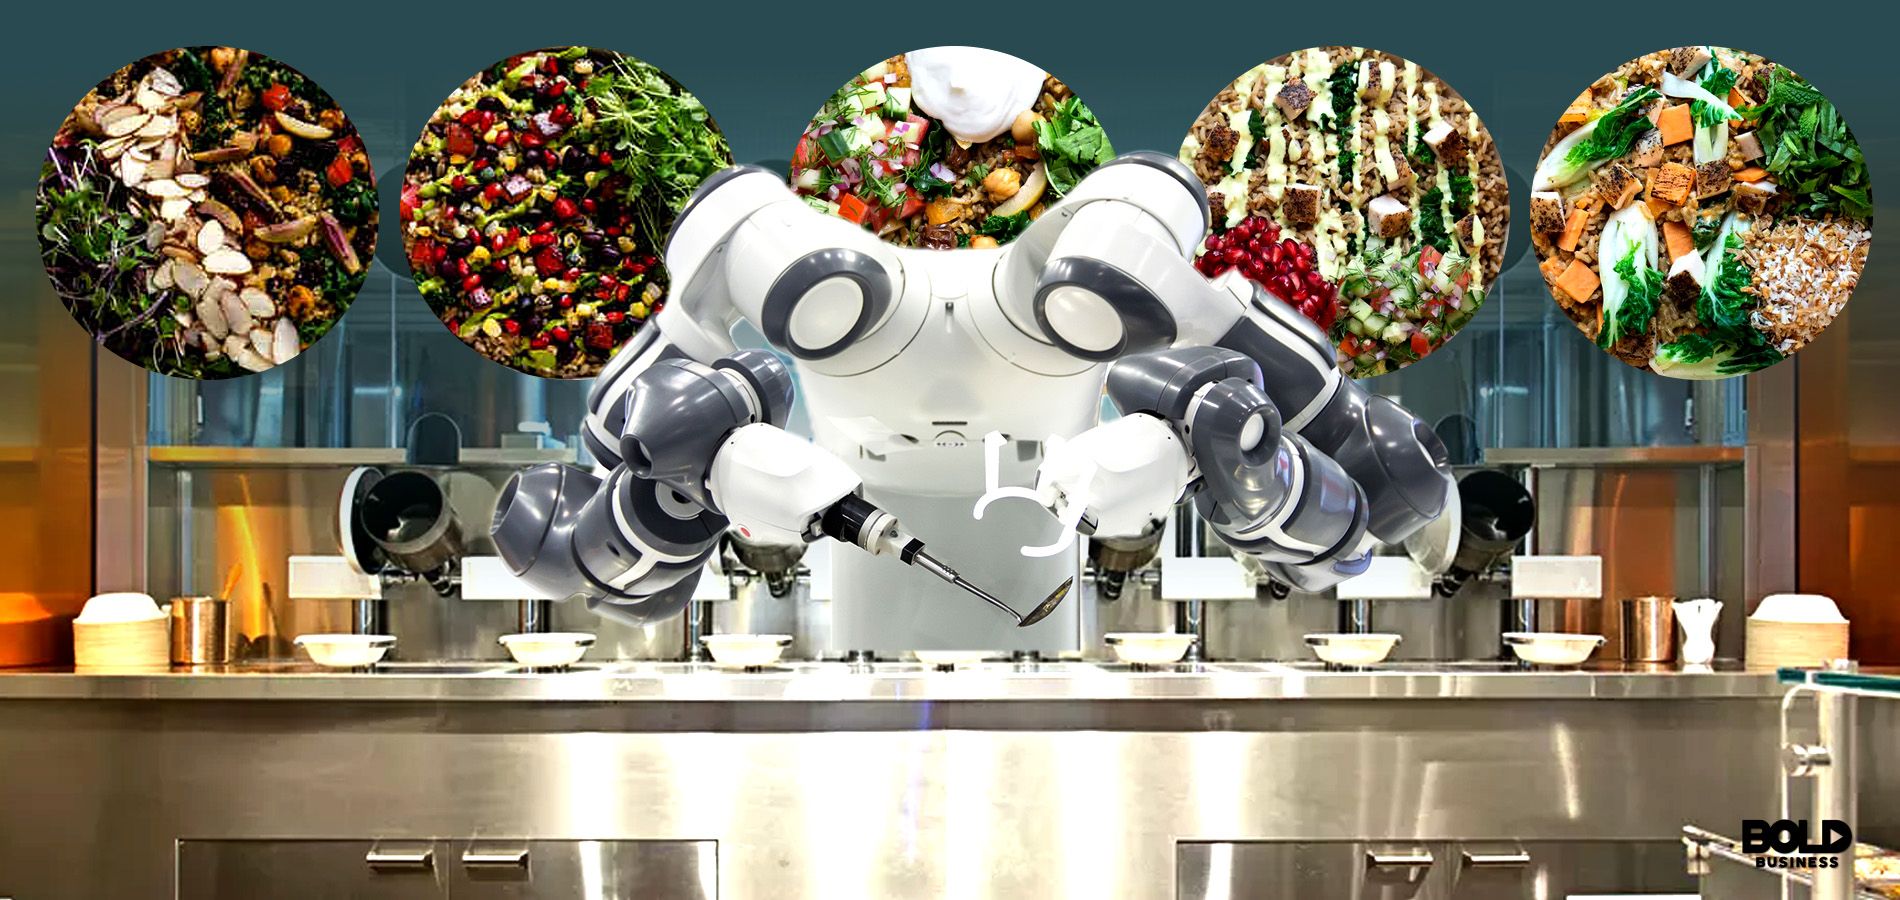 Spyce Restaurant’s Kitchen Robot: Could Automation be the Next Fast Food Frontier?